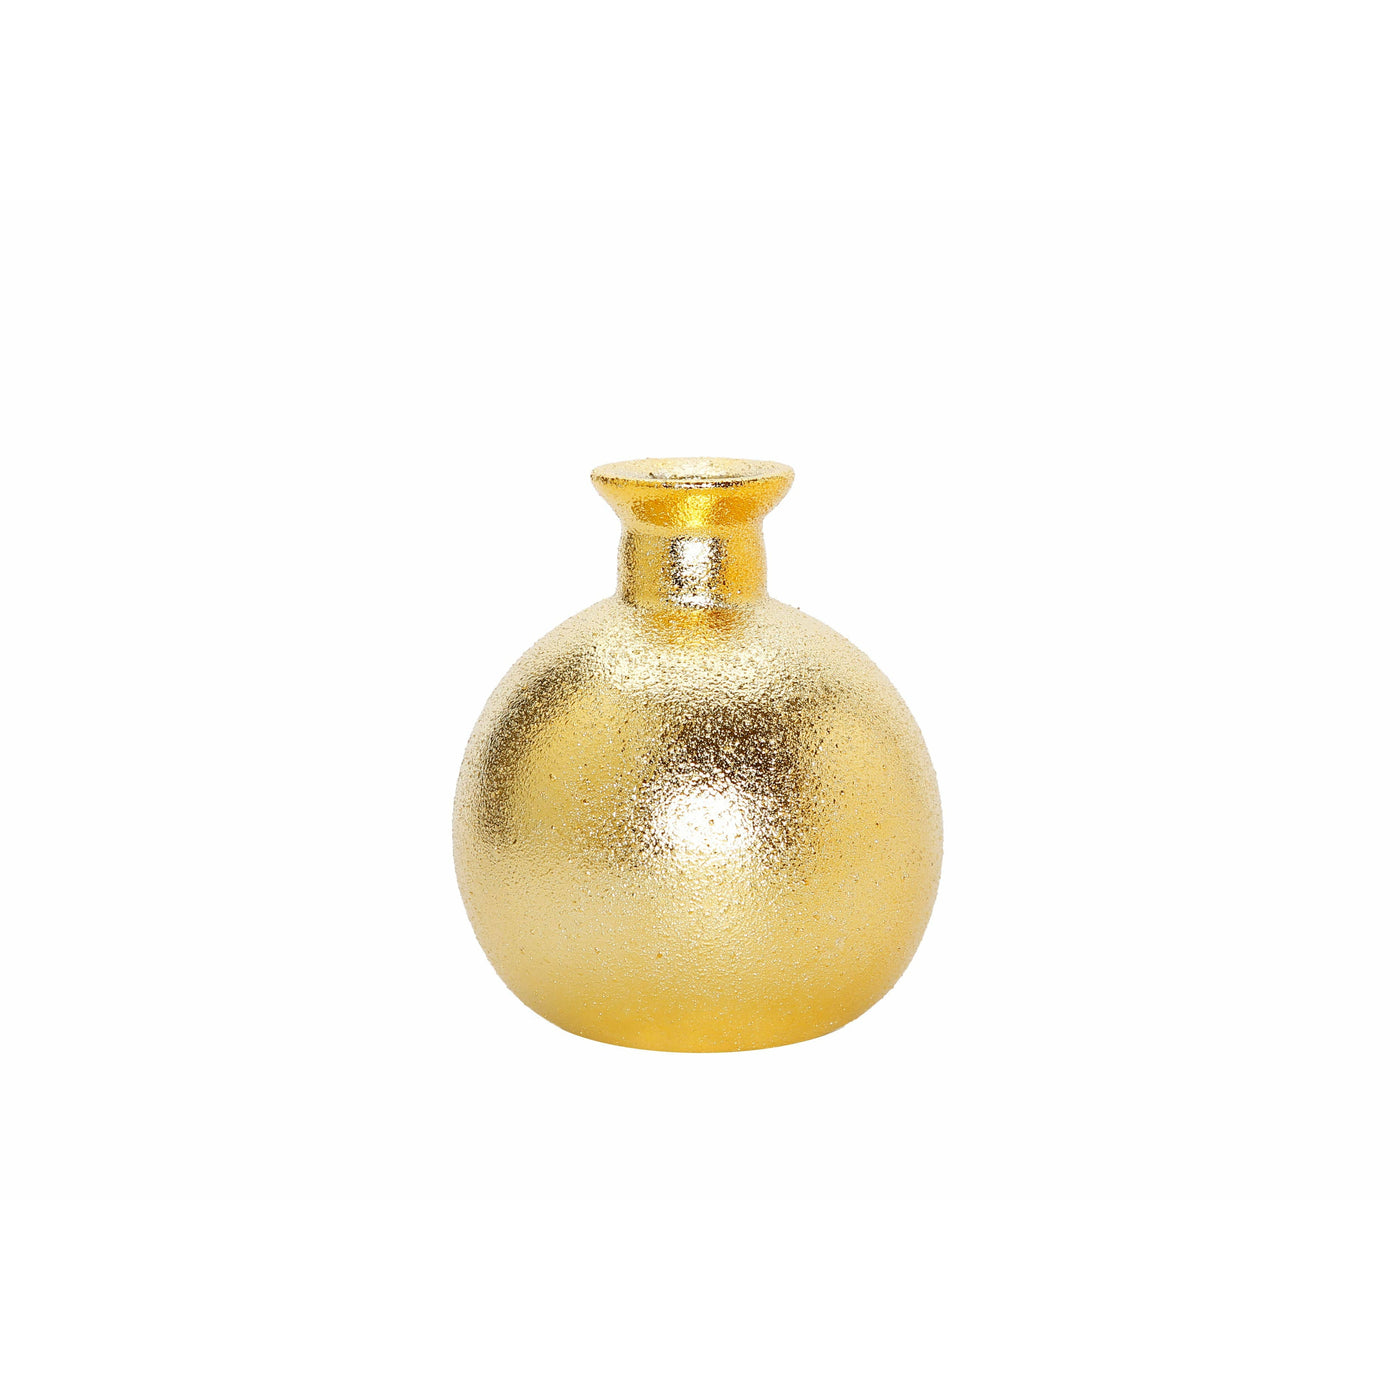 Gold Diffuser Tall White Flower, "Lily of The Valley" scent